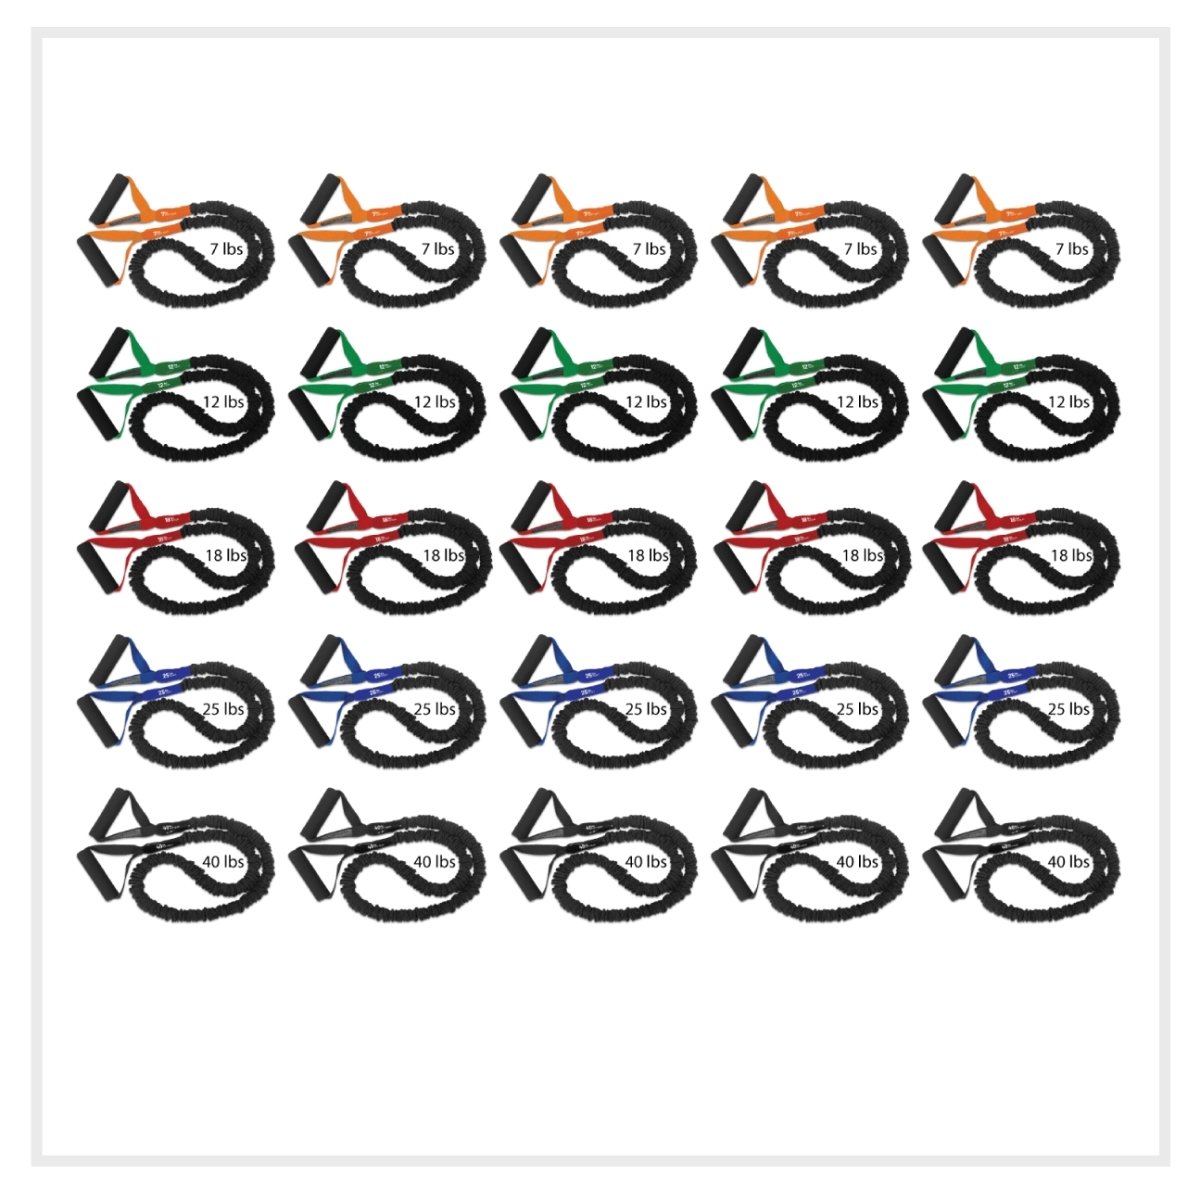 American made Covered resistance bands with handles sold in bulk at a discount for gyms, crossfit boxes, personal trainers and rehab centers. High Quality workout and exercise bands Best resistance bands on the market today